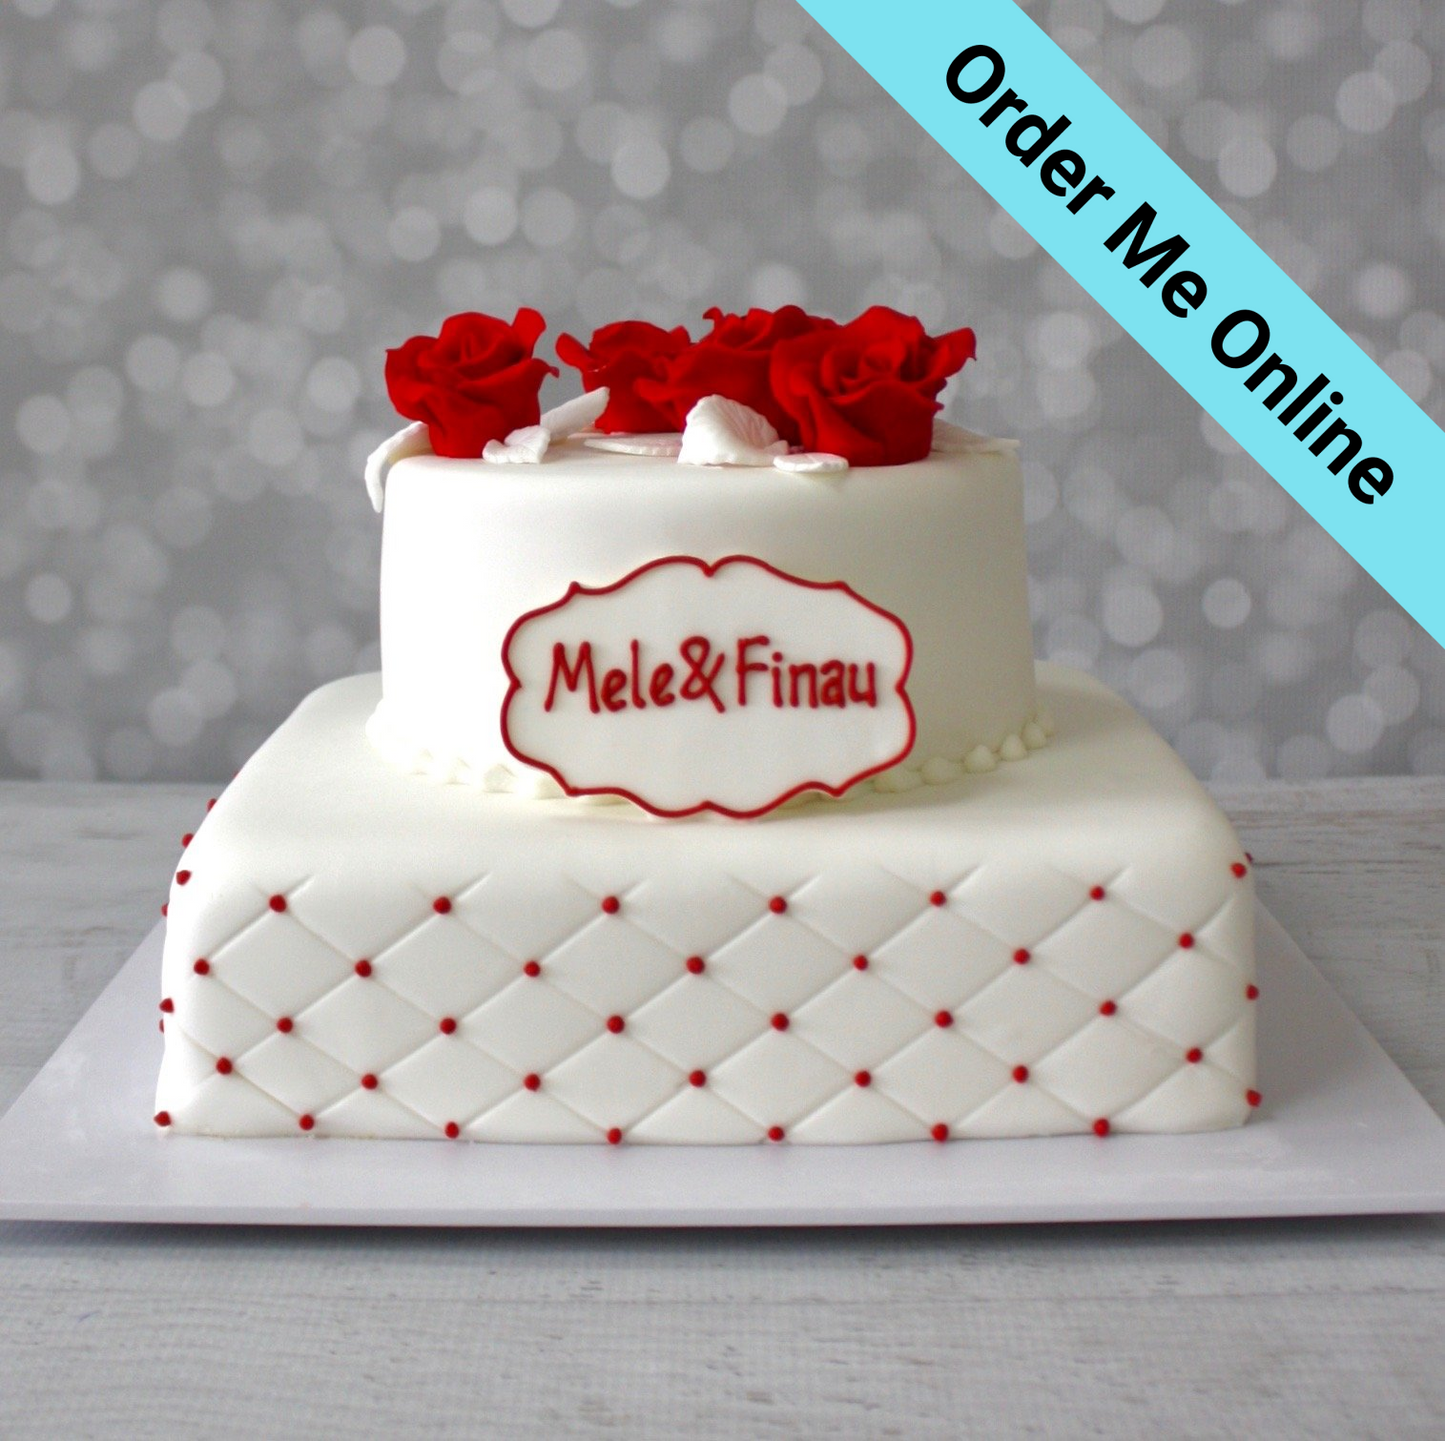 3 Tier Cakes Buy Online Quick Delivery - Dough and Cream